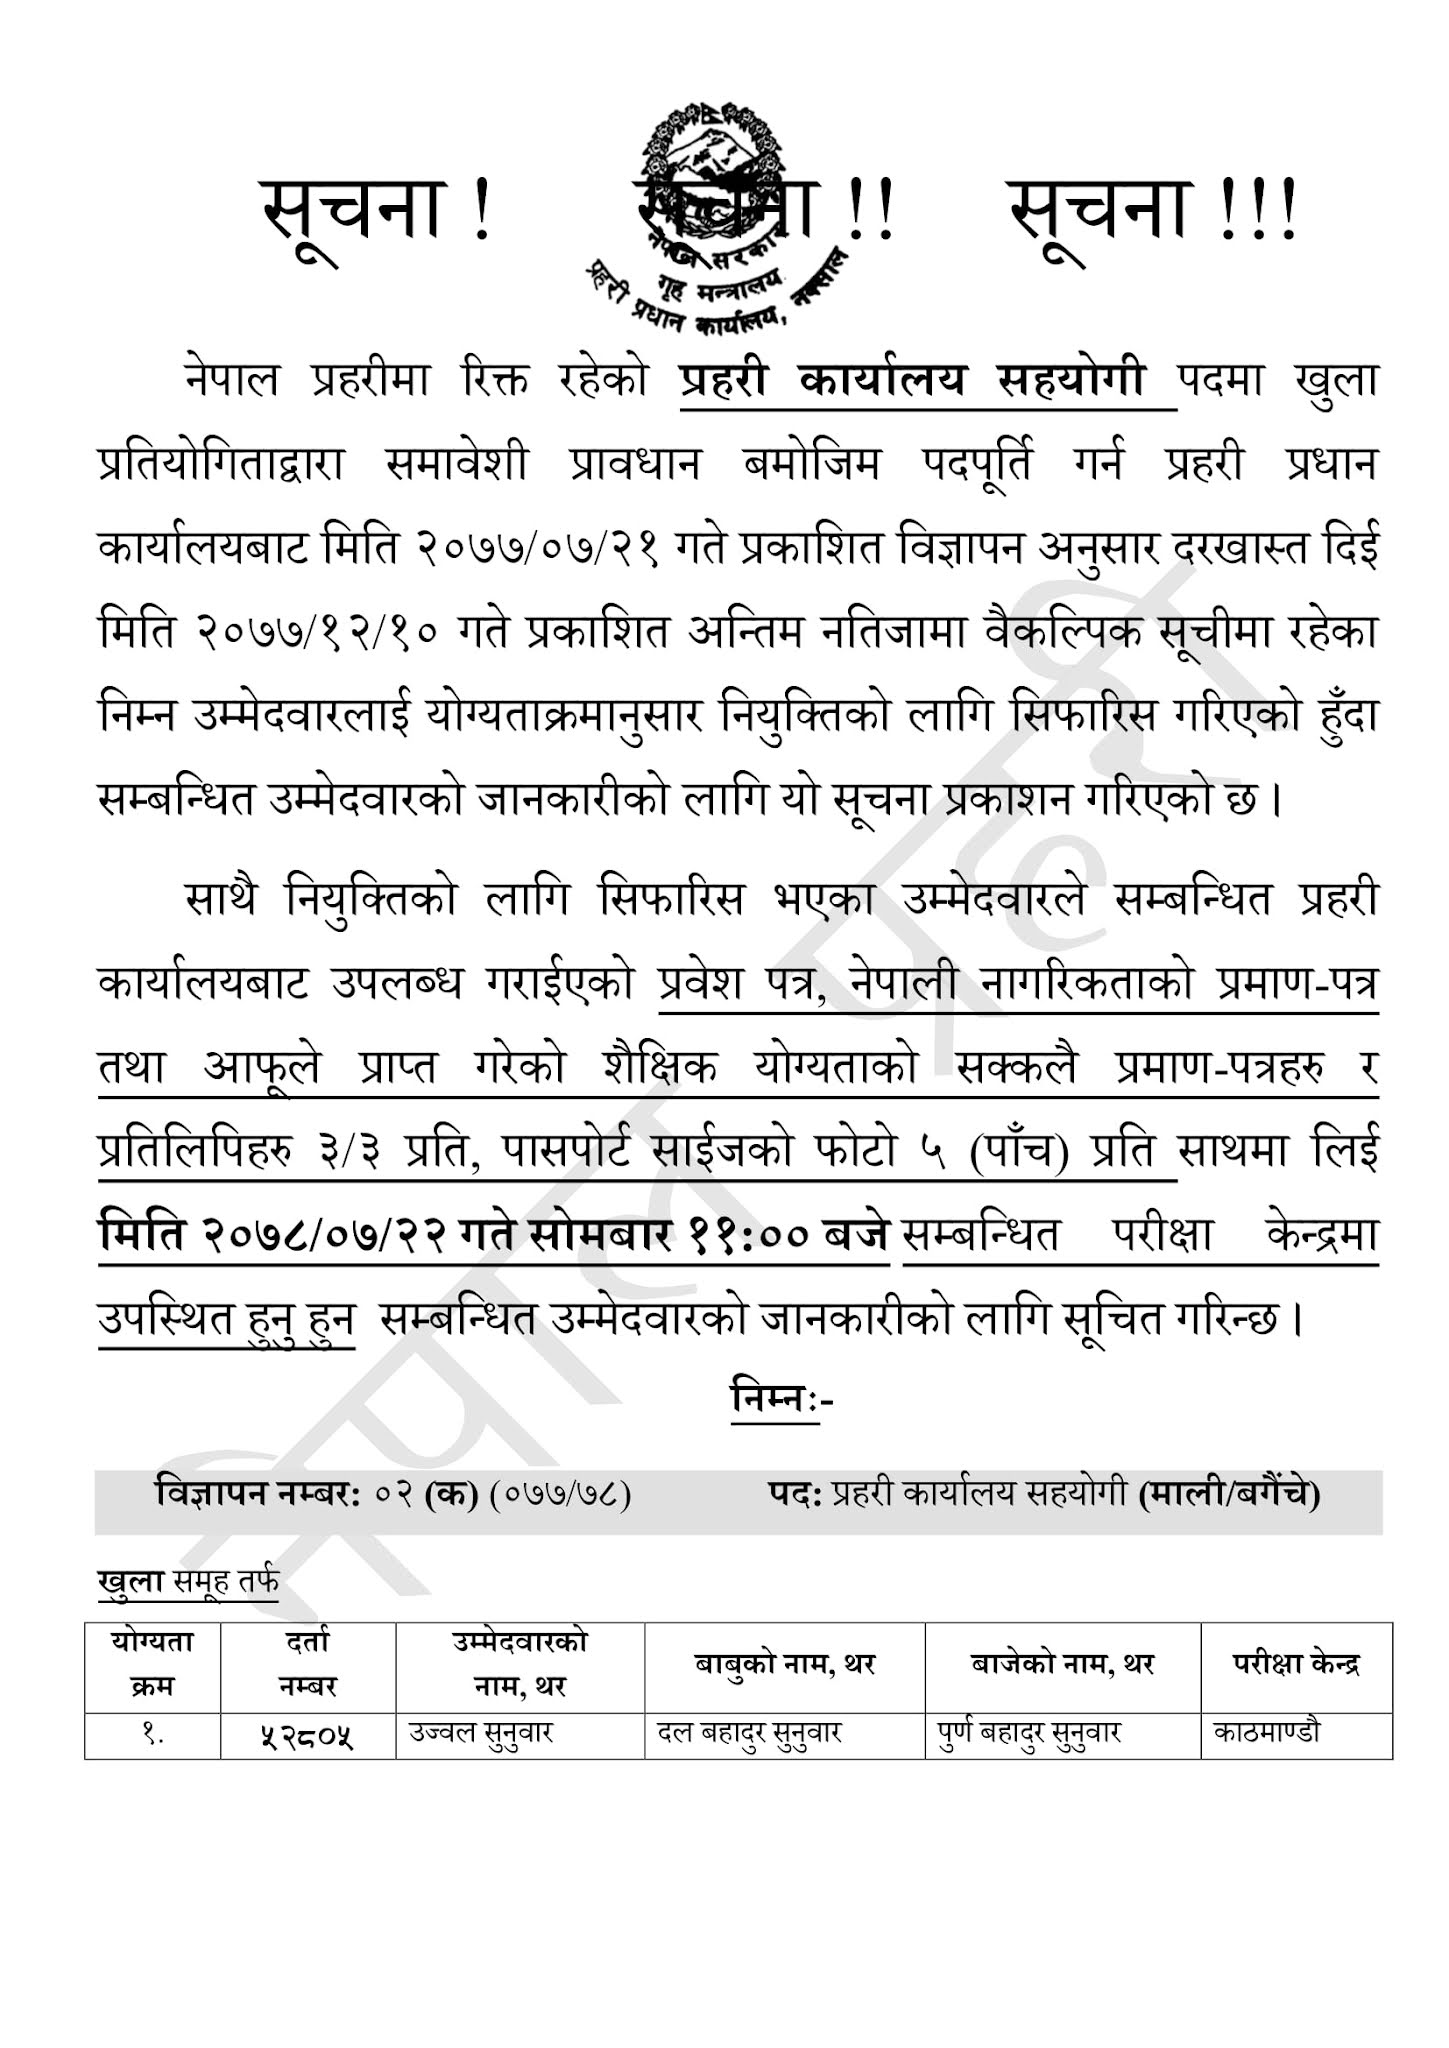 Nepal Police Information regarding appointment of alternative candidate